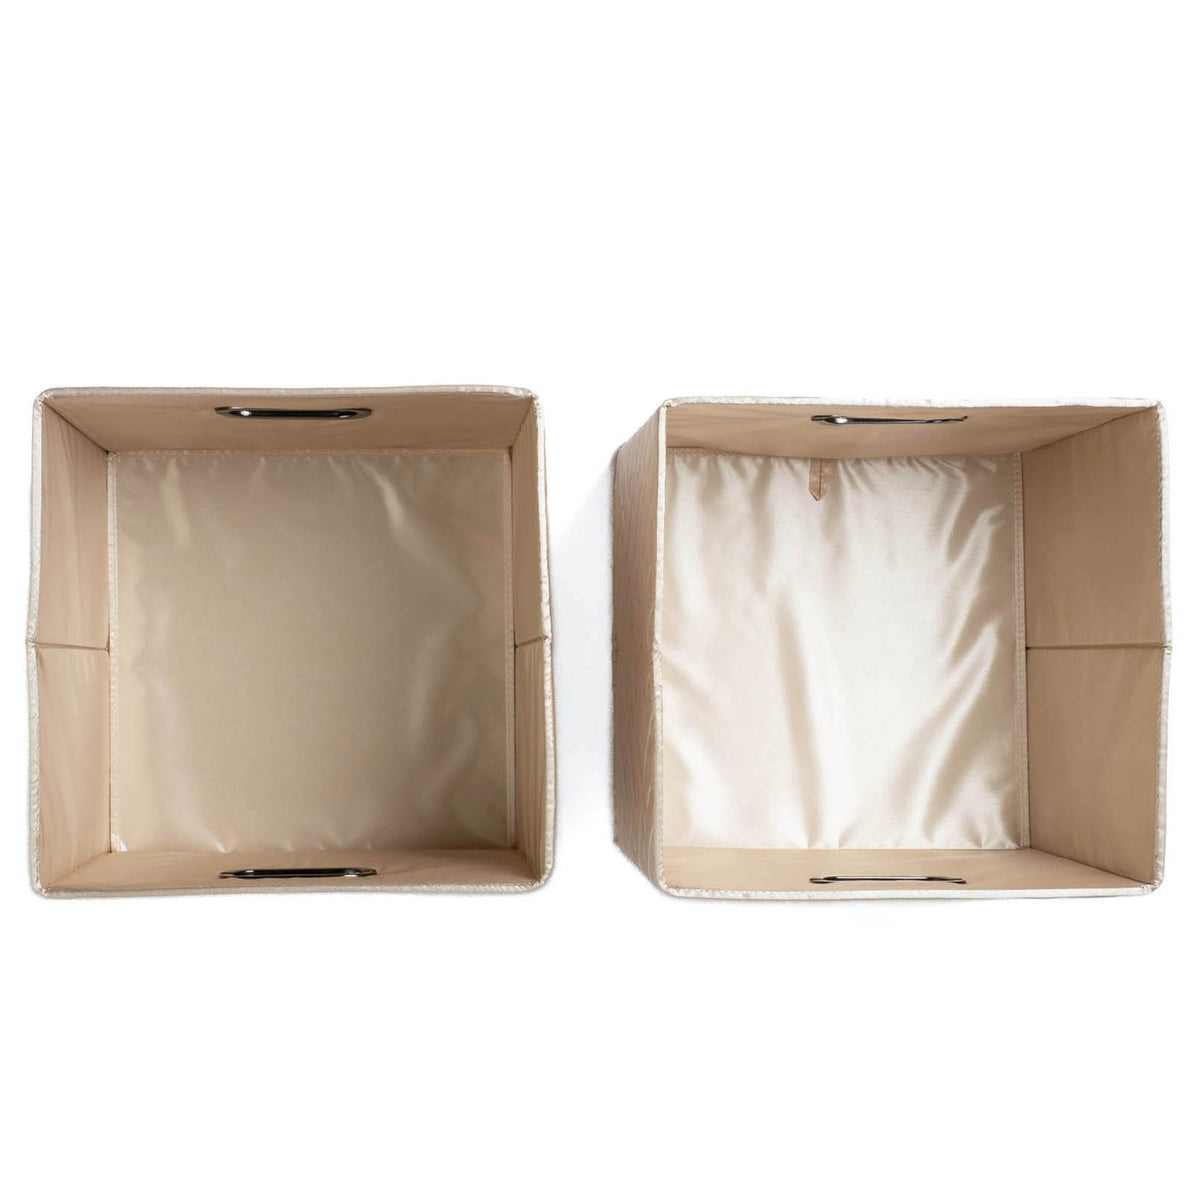 Cargo 2pc Collapsible Cube Bins